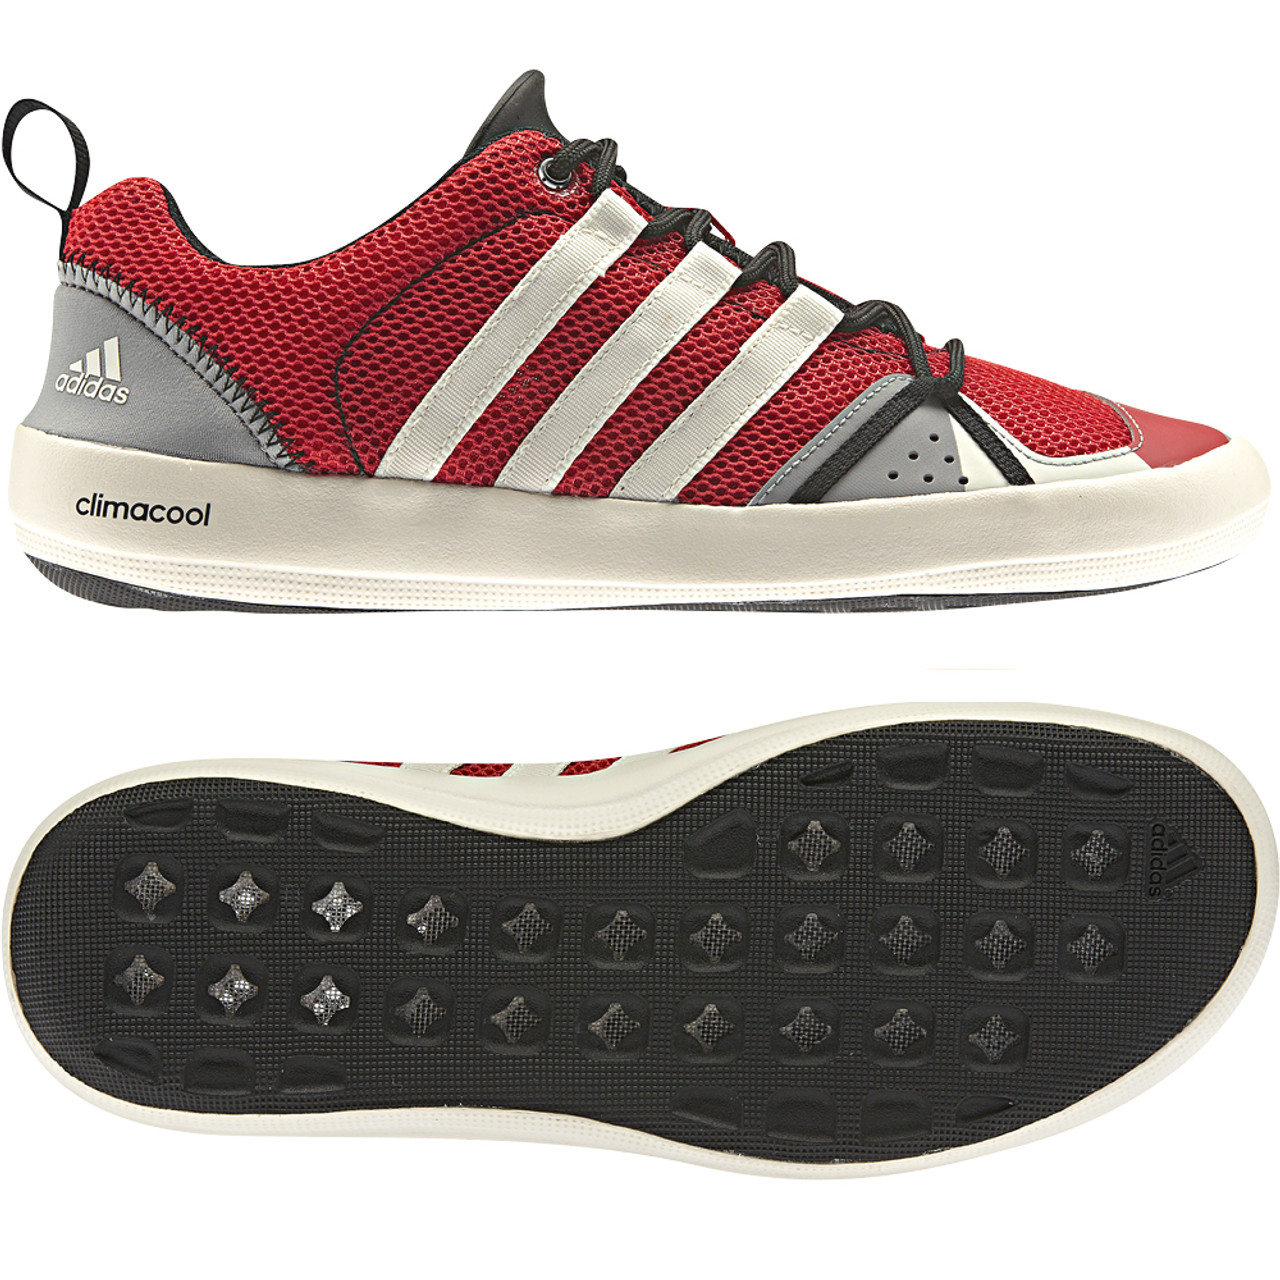 Adidas Climacool Lace Red/White Mens Outdoor Shoes - | Discount Adidas Men's Athletic Shoes & - Shoolu.com |